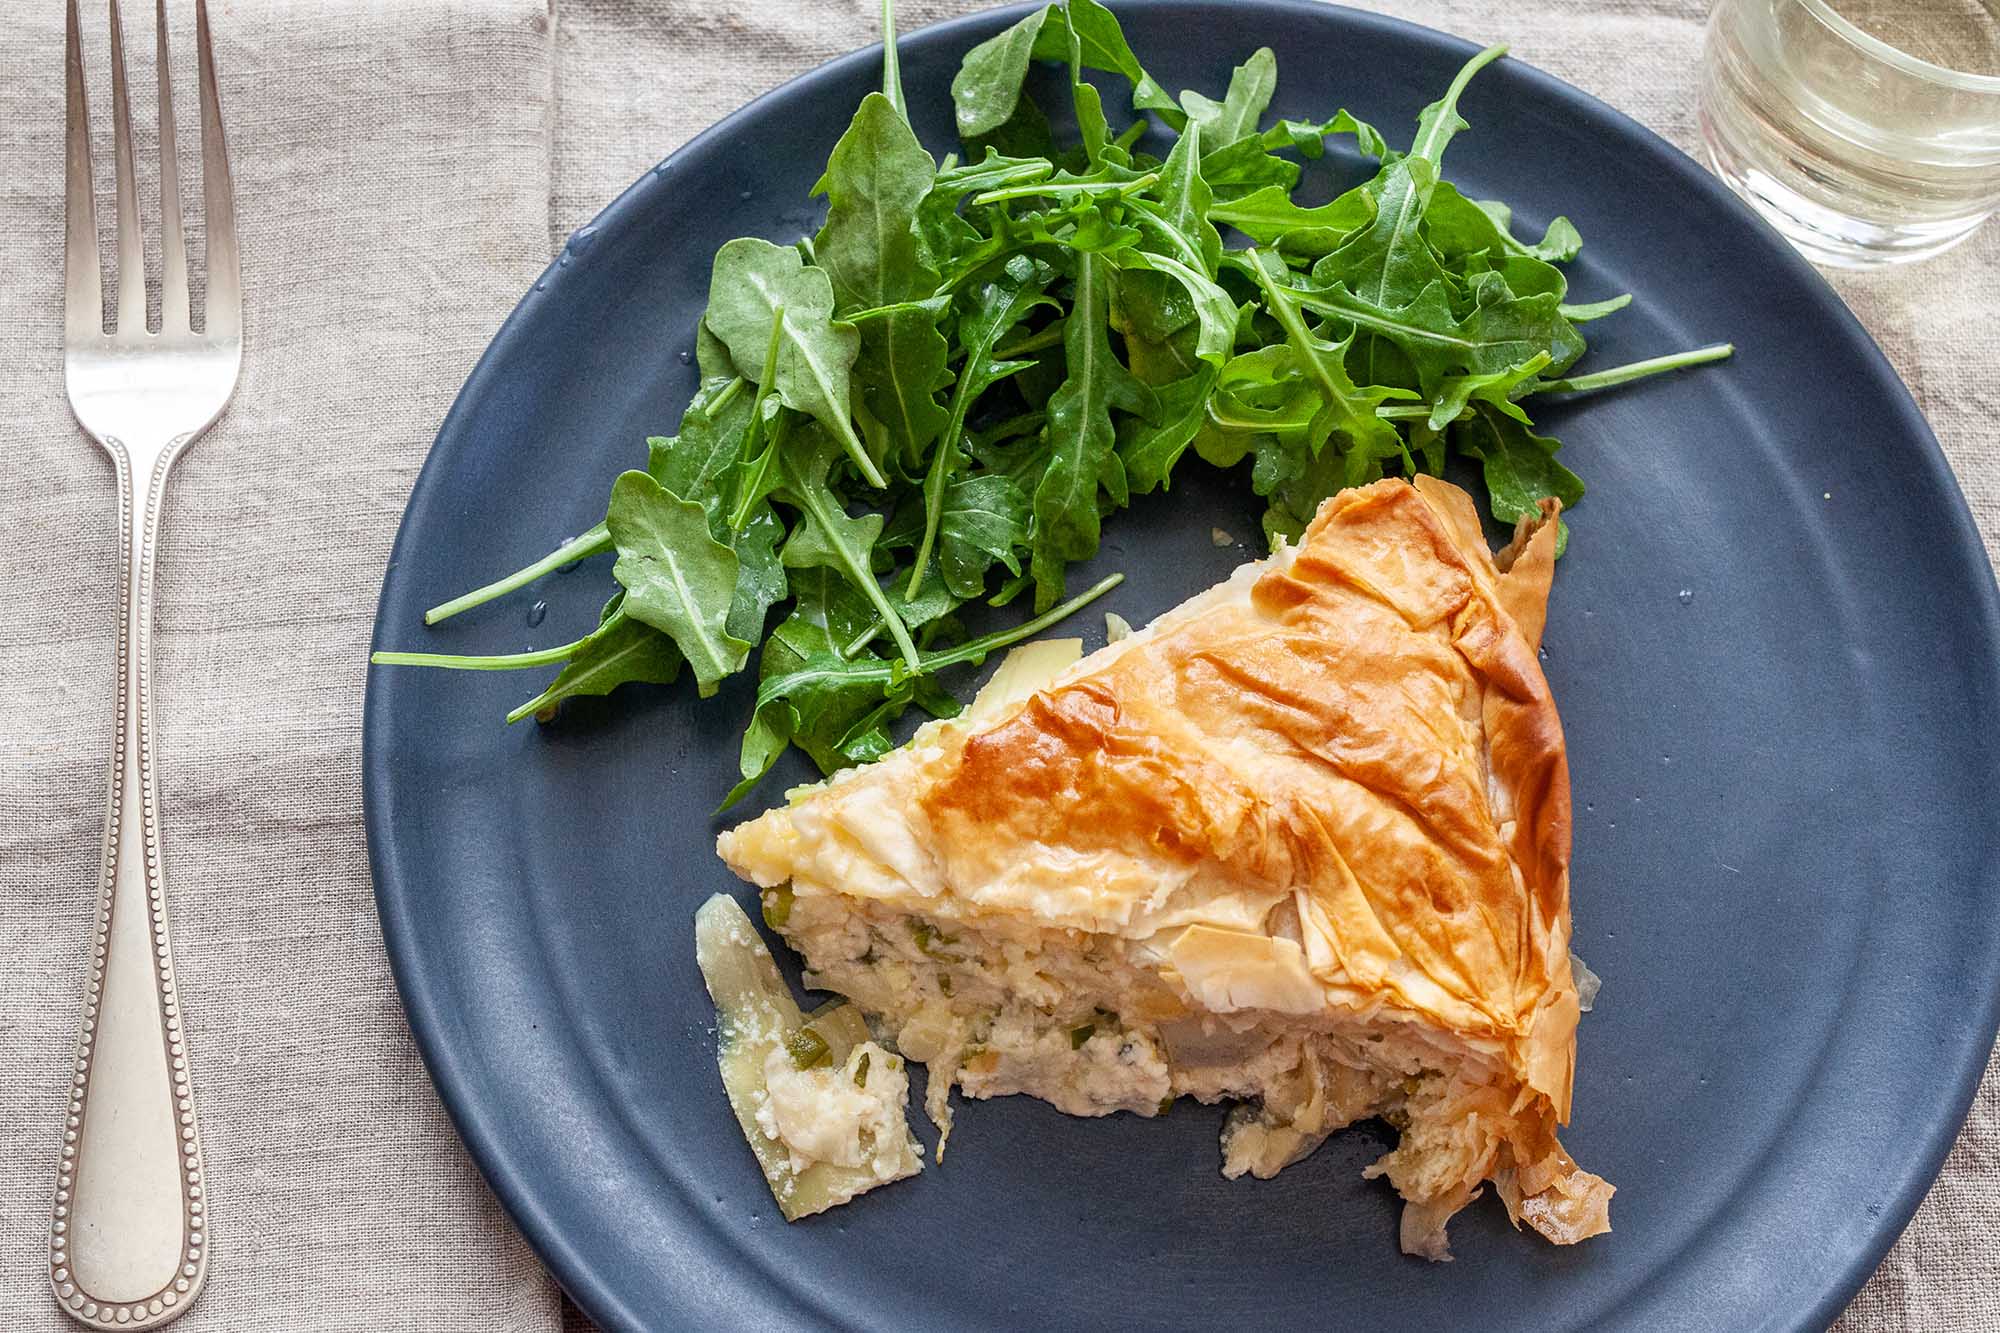 Overhead horizontal view of a blue plate with a slice of cheese pie with artichokes on it. The filling is slightly spilling out of the slice. A green arugula salad is behind the pie on the plate. A silver fork is to the left of the plate and a glass is in partial view in the upper right corner.